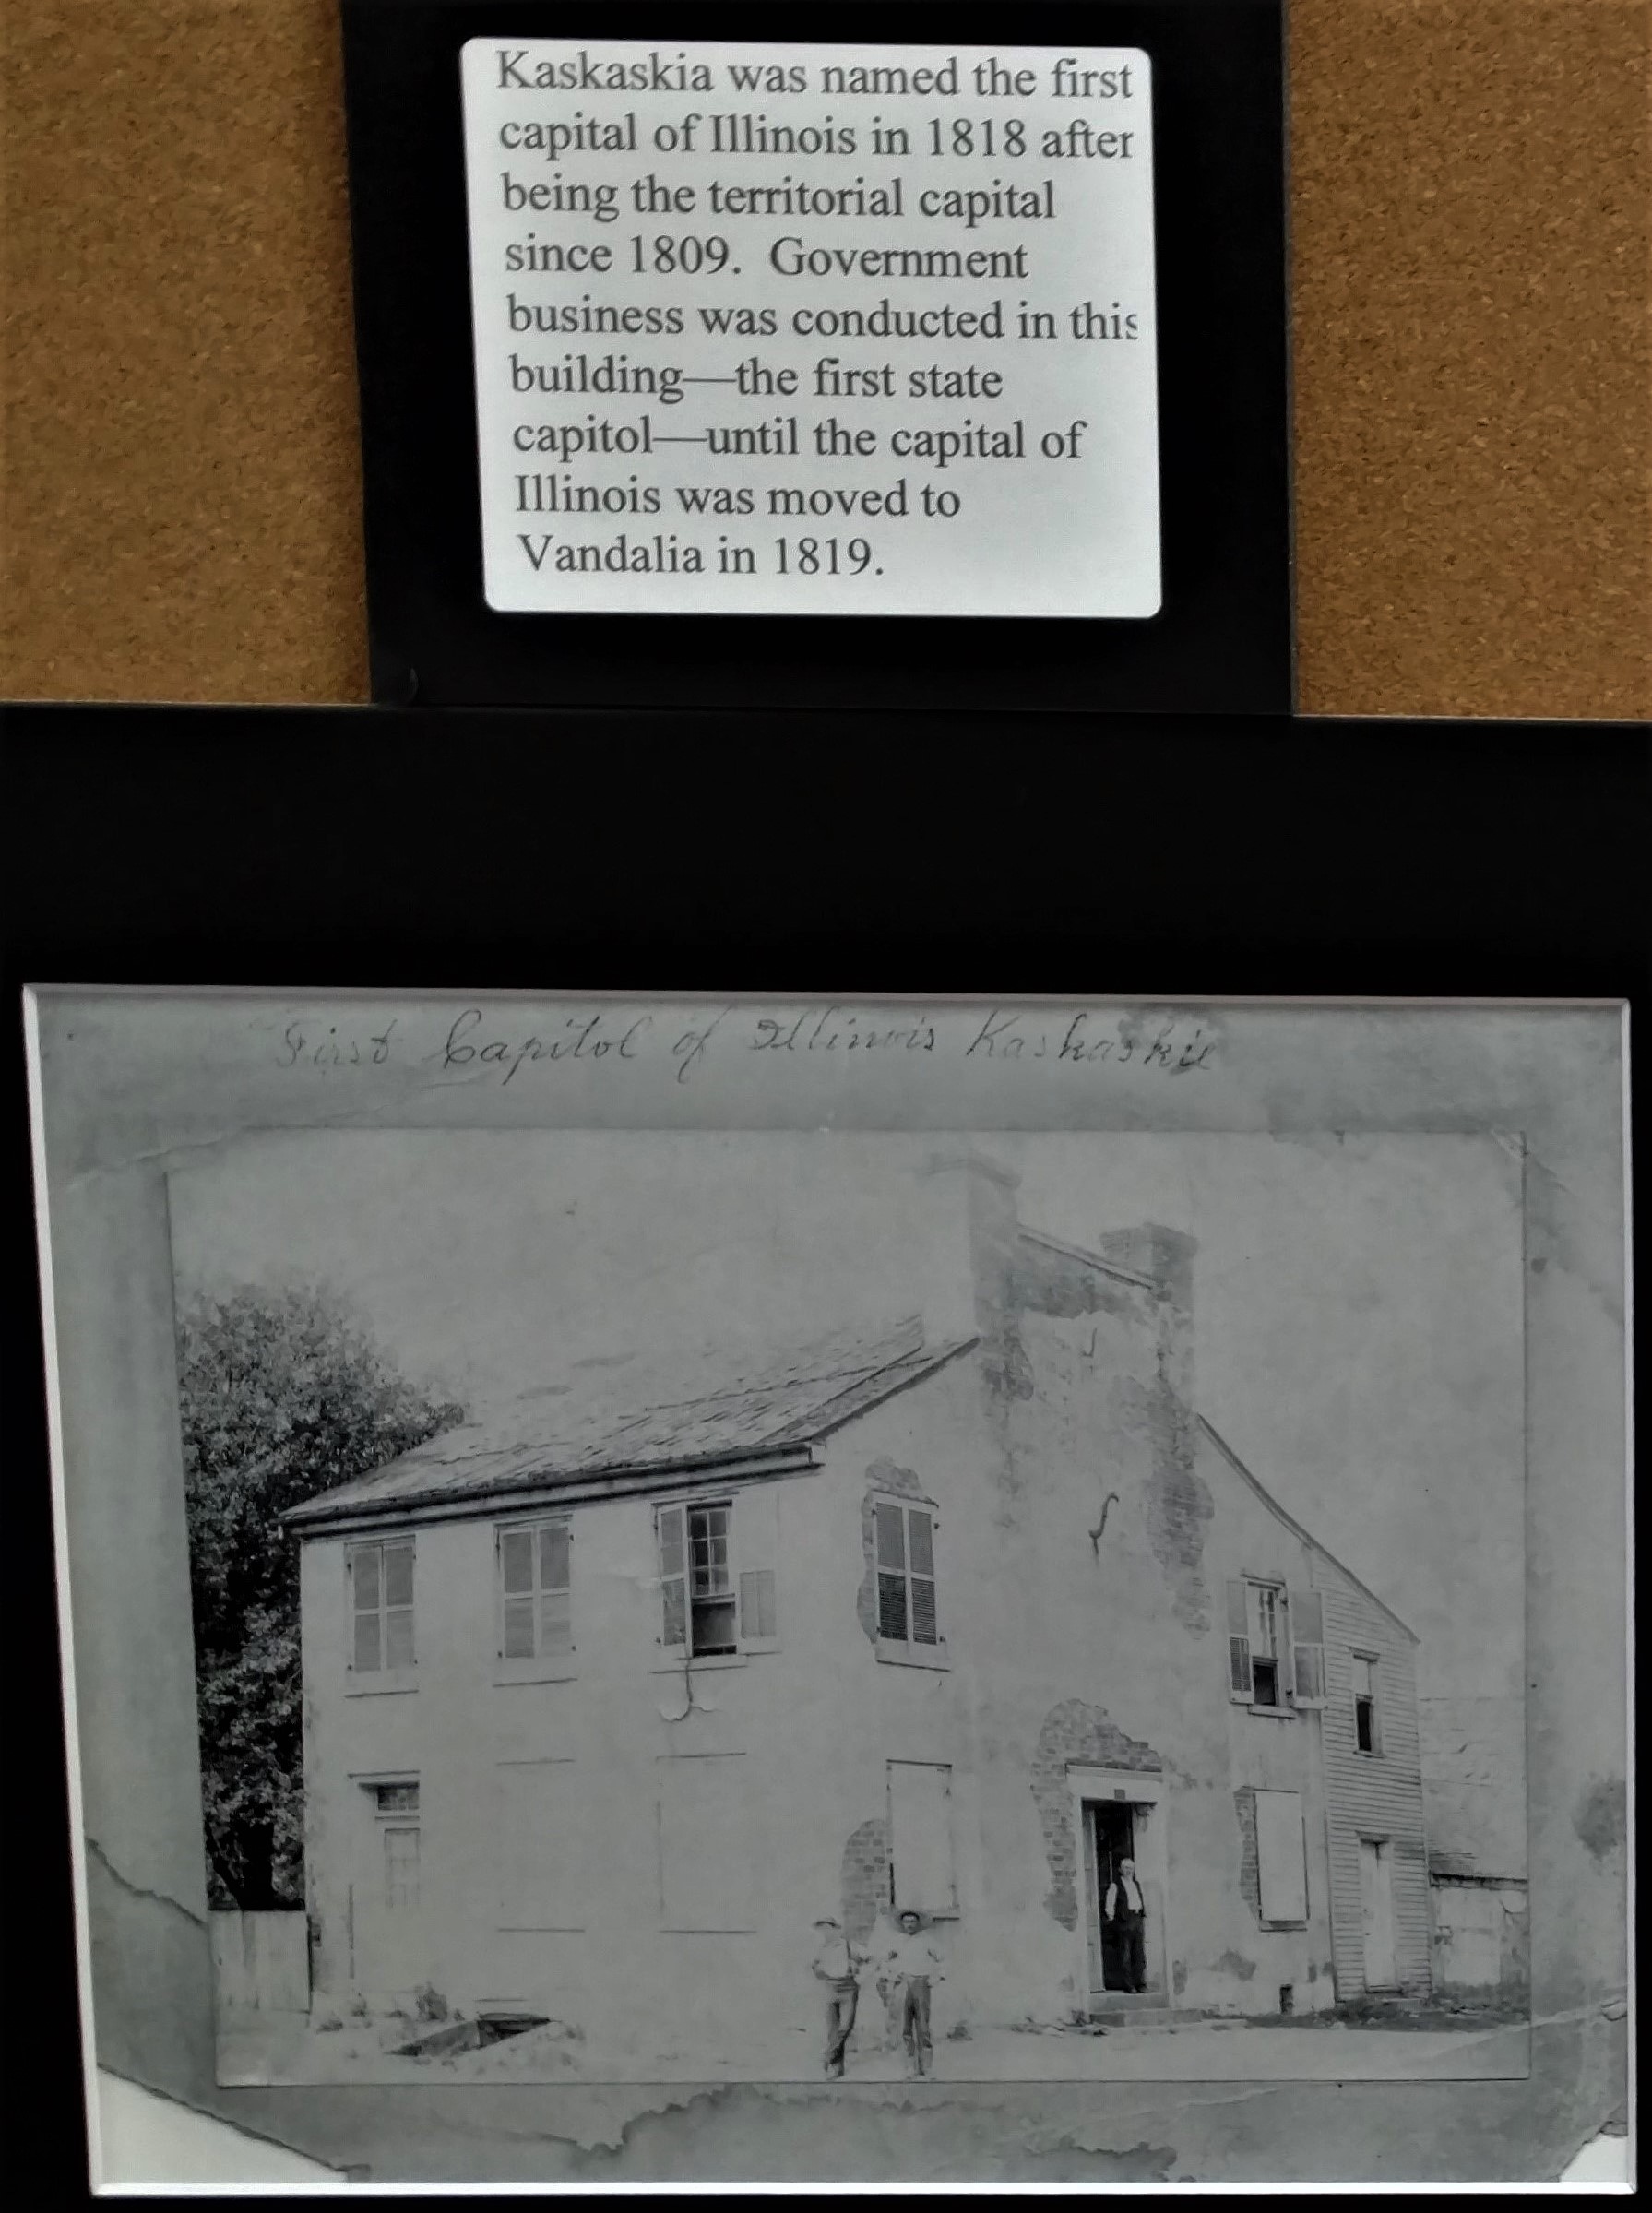 Photograph of part of Chester Library’s companion exhibition featuring an image of Illinois’s original capitol building in Kaskaskia.